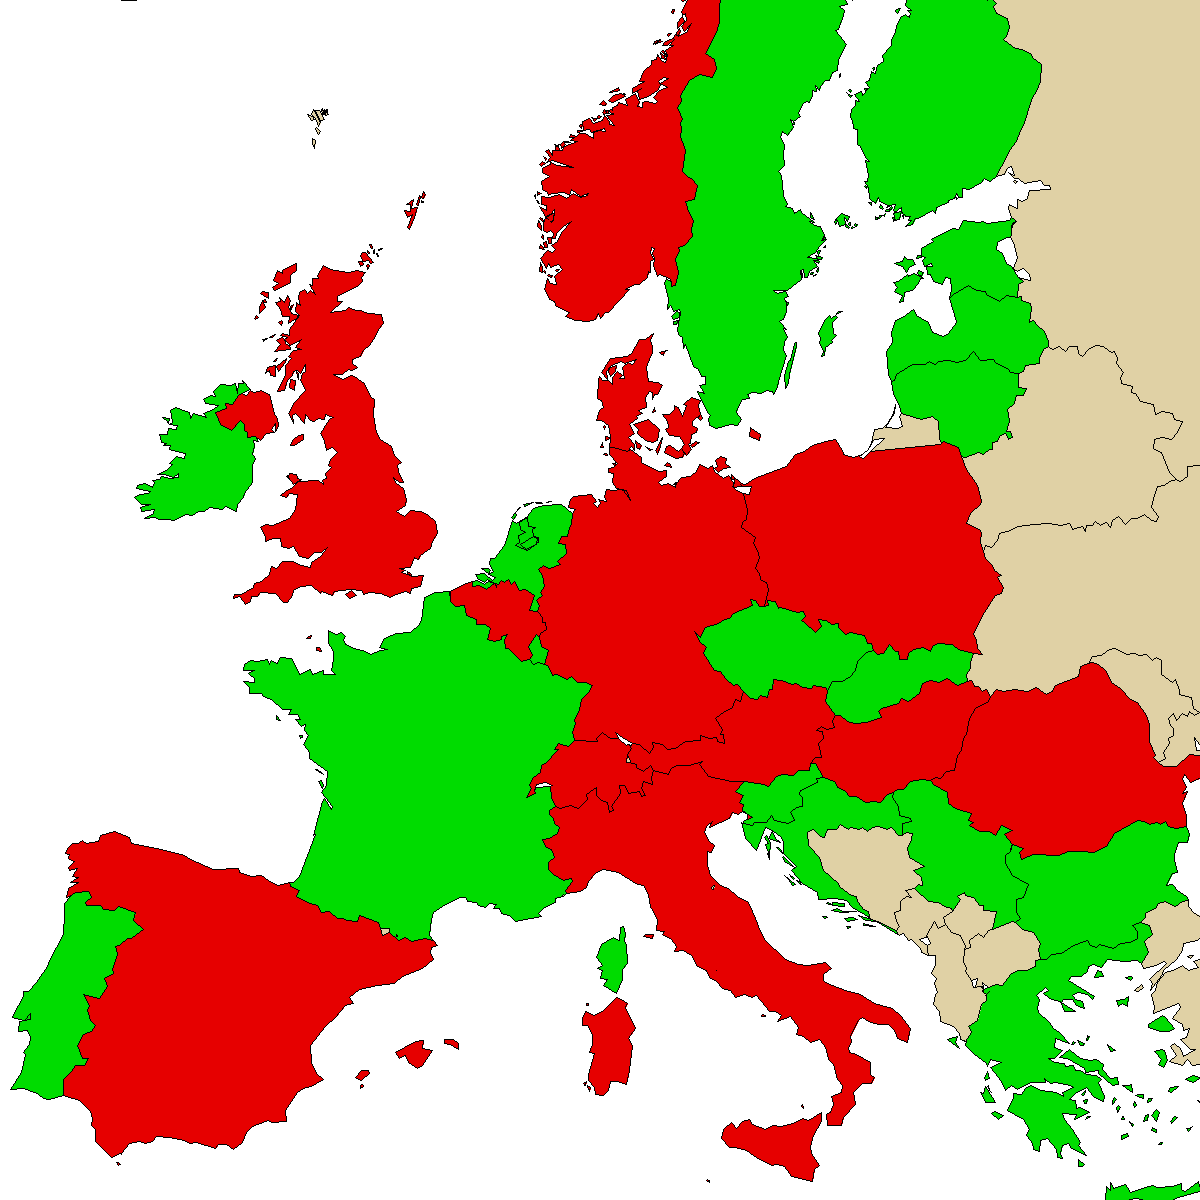 legal info map for our product Euthylone, green are countries where we found no ban, red with ban, grey is unknown